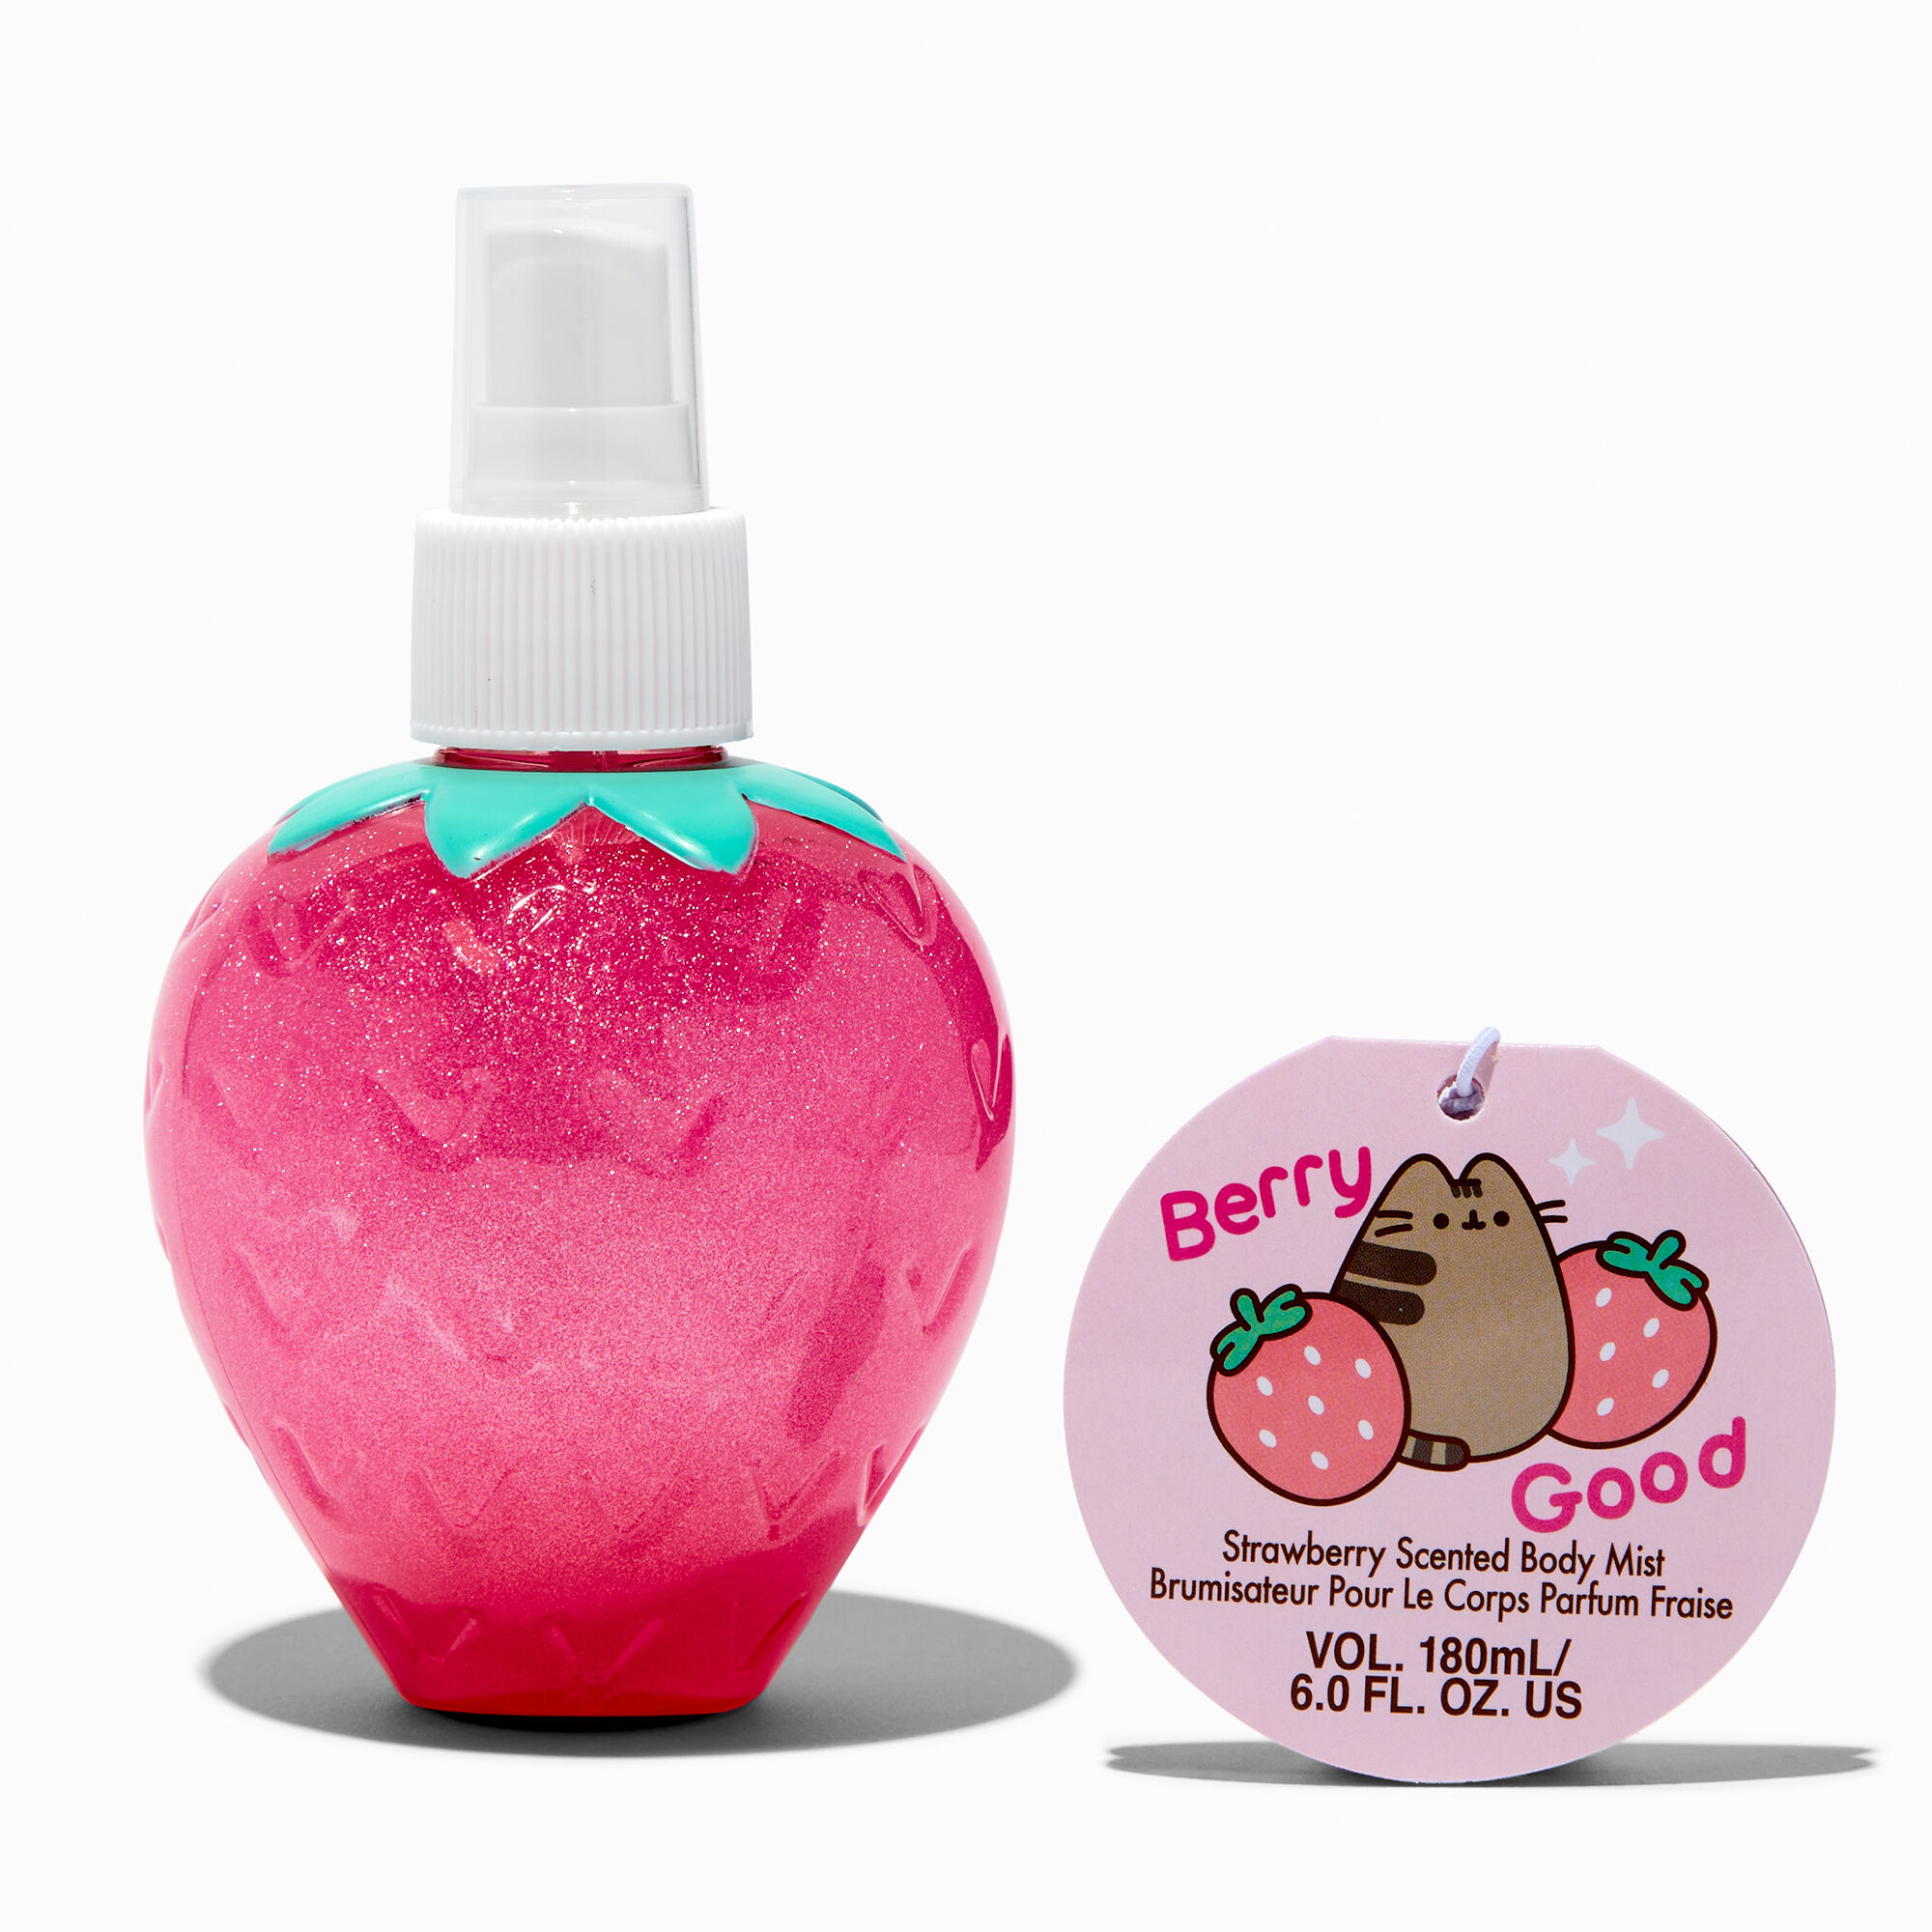 View Claires Pusheen Strawberry Scented Body Mist information